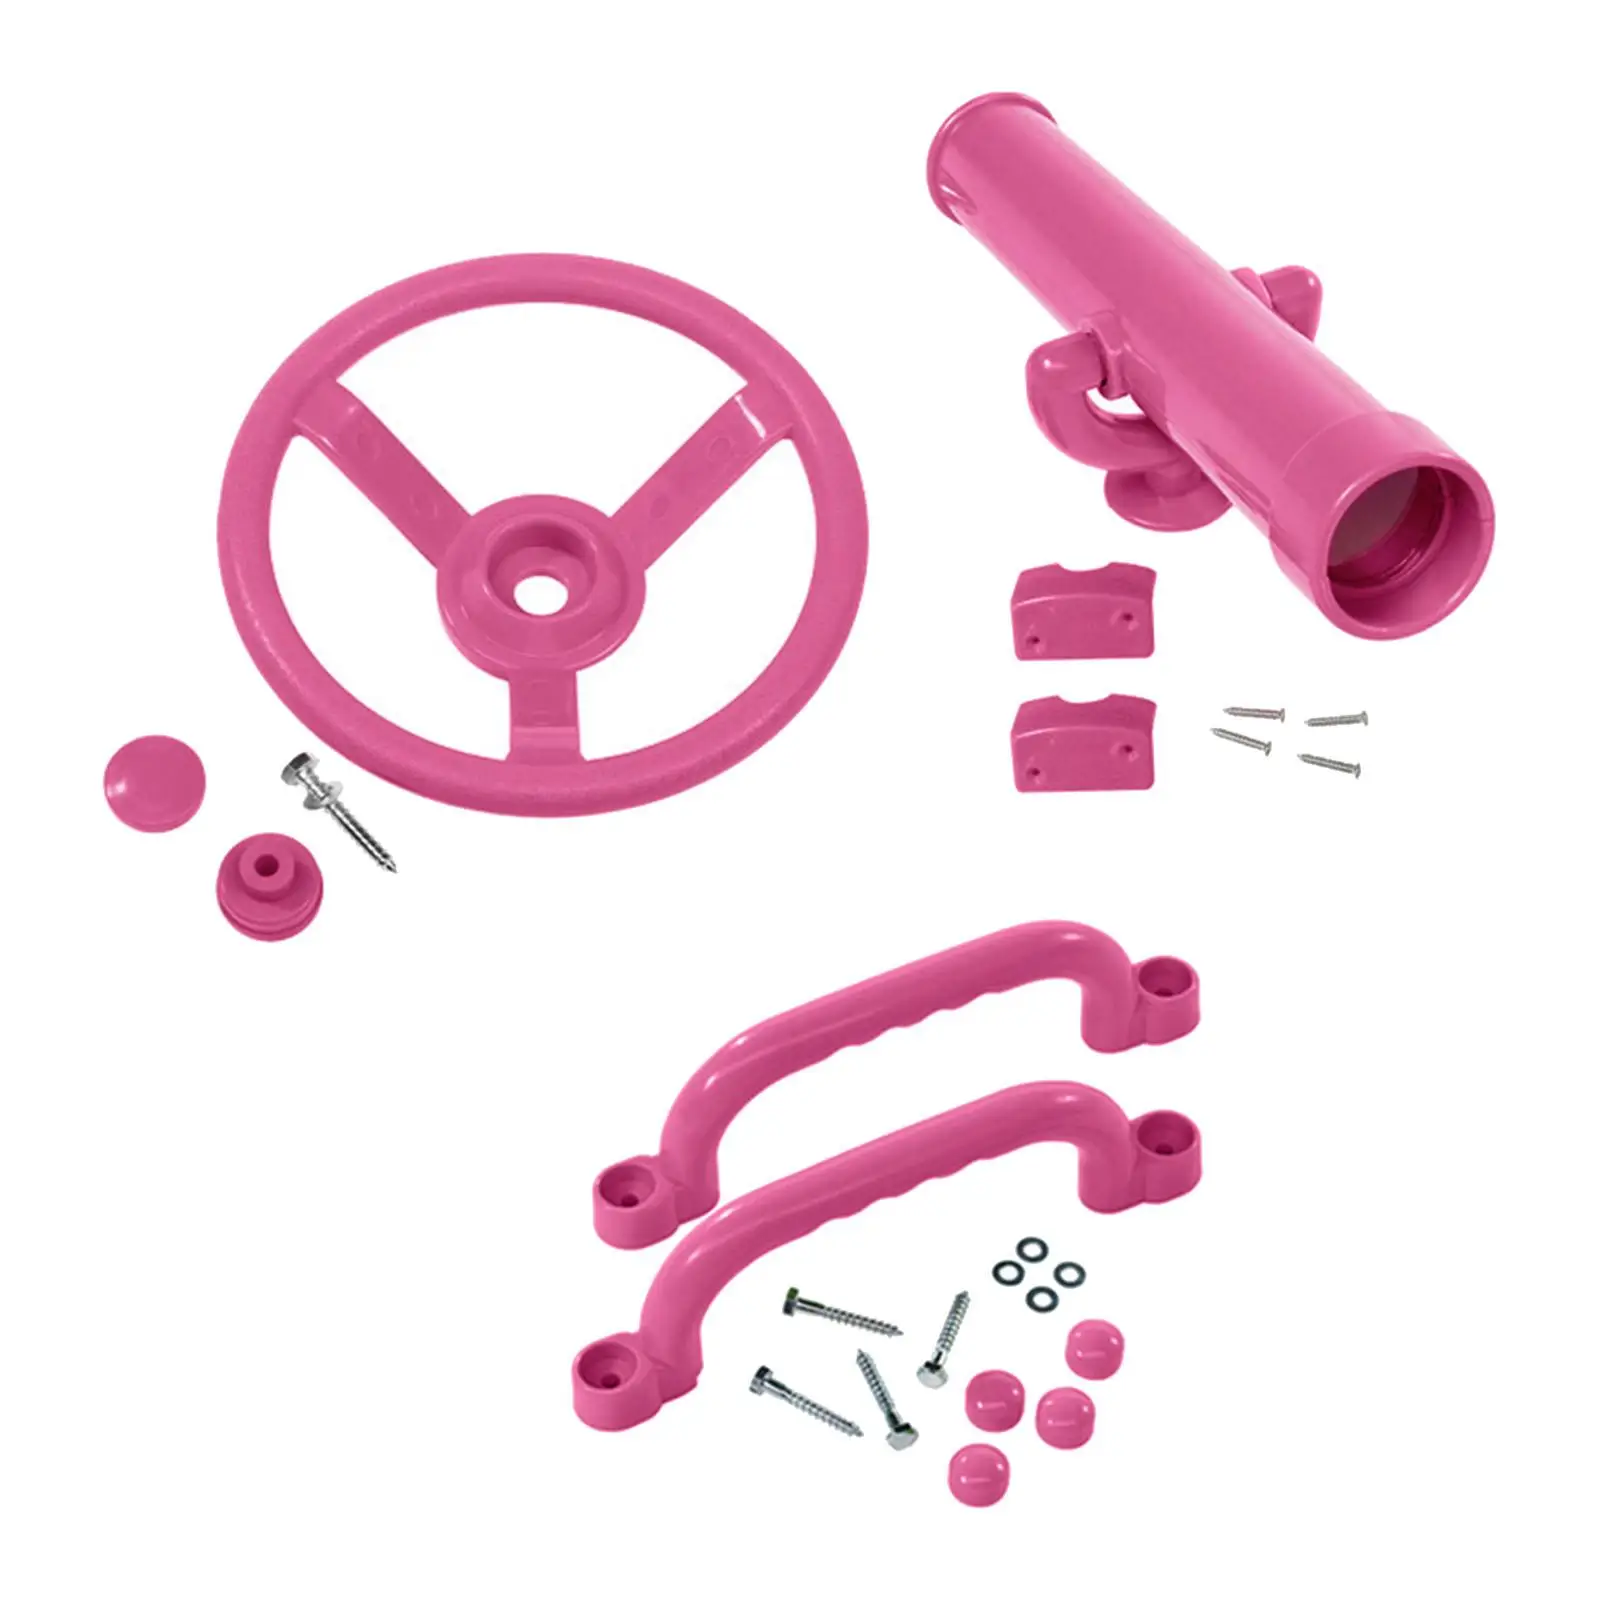 Playground Accessories Pink Set Pirate Telescope Steering Wheel Handle Bars for Tree House Backyard Swingset Jungle Gym Parts